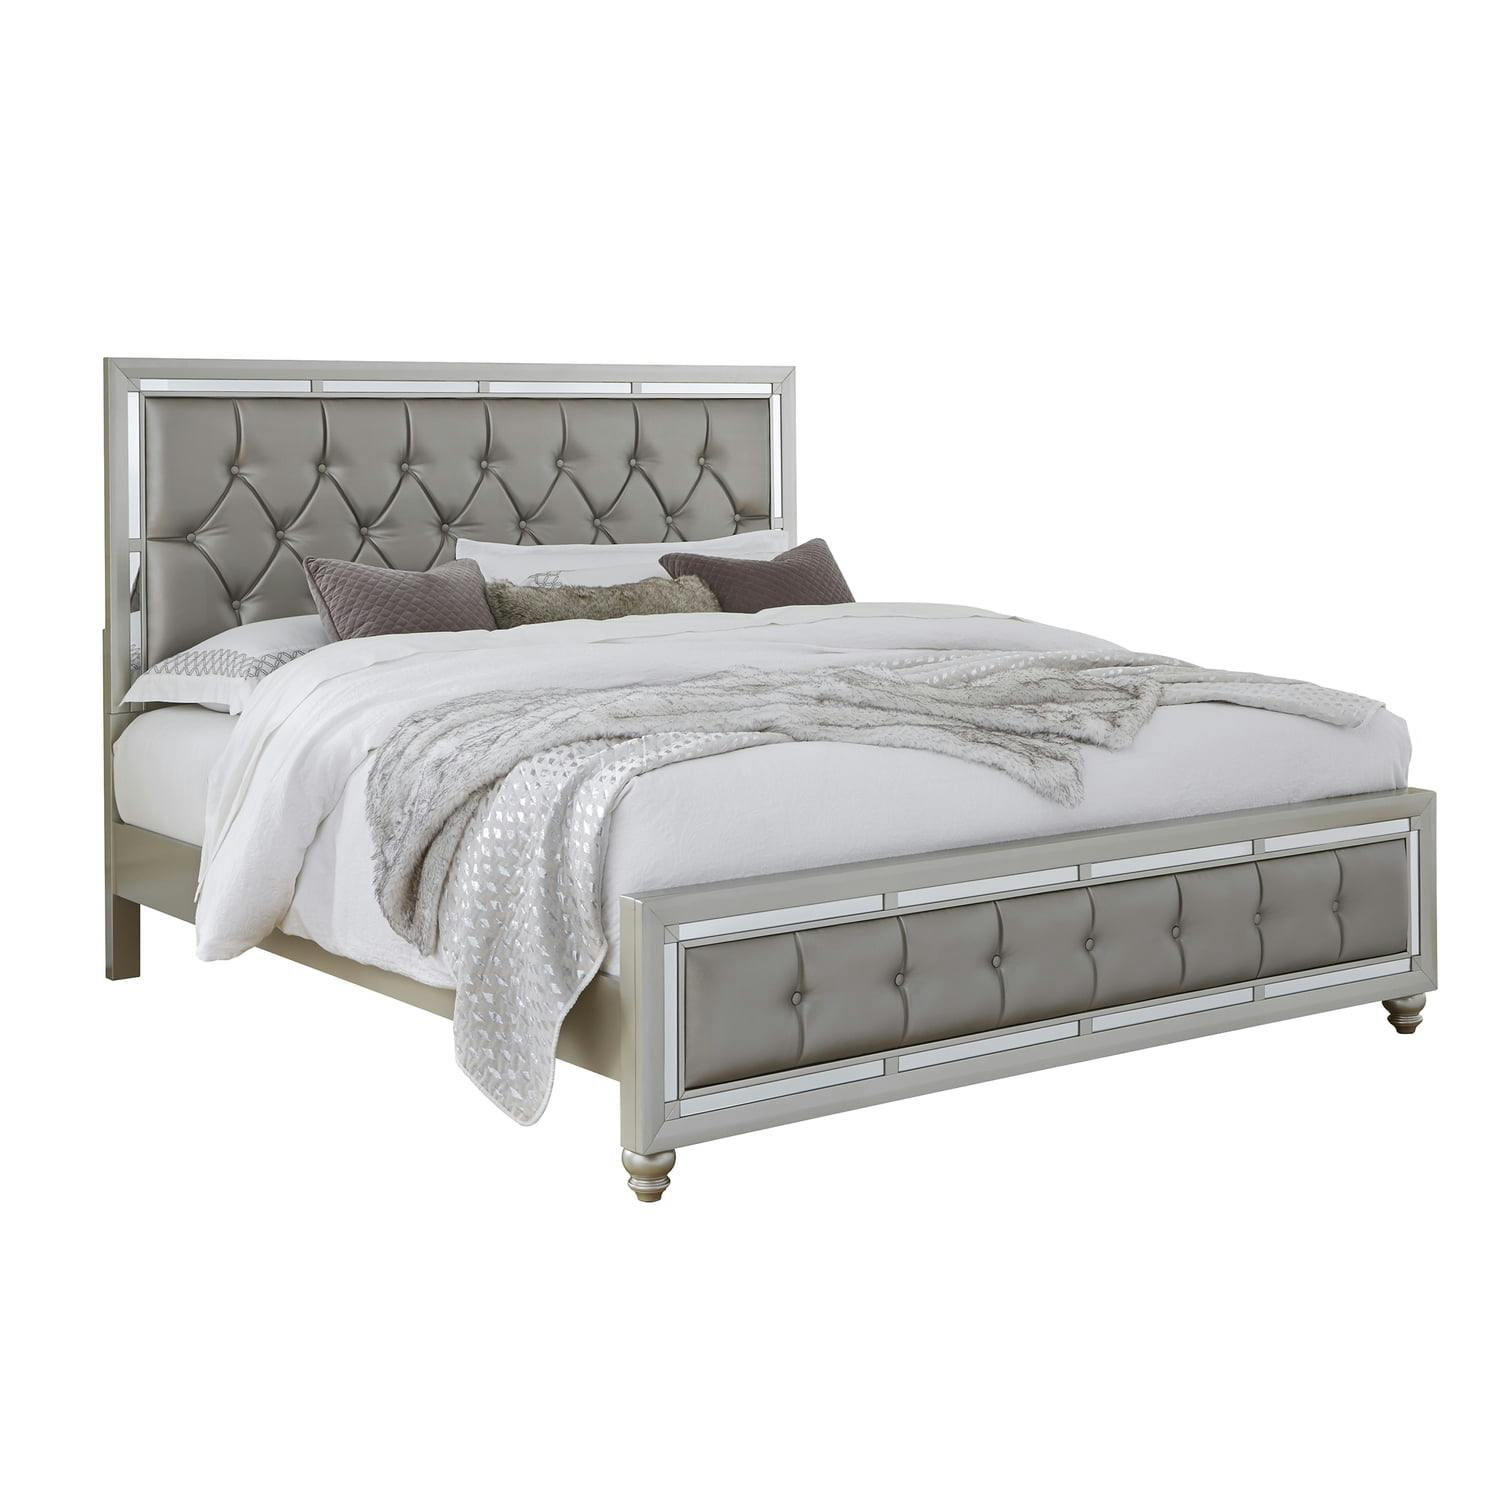 Elegant Silver Champagne Full Bed with Tufted Faux Leather Headboard